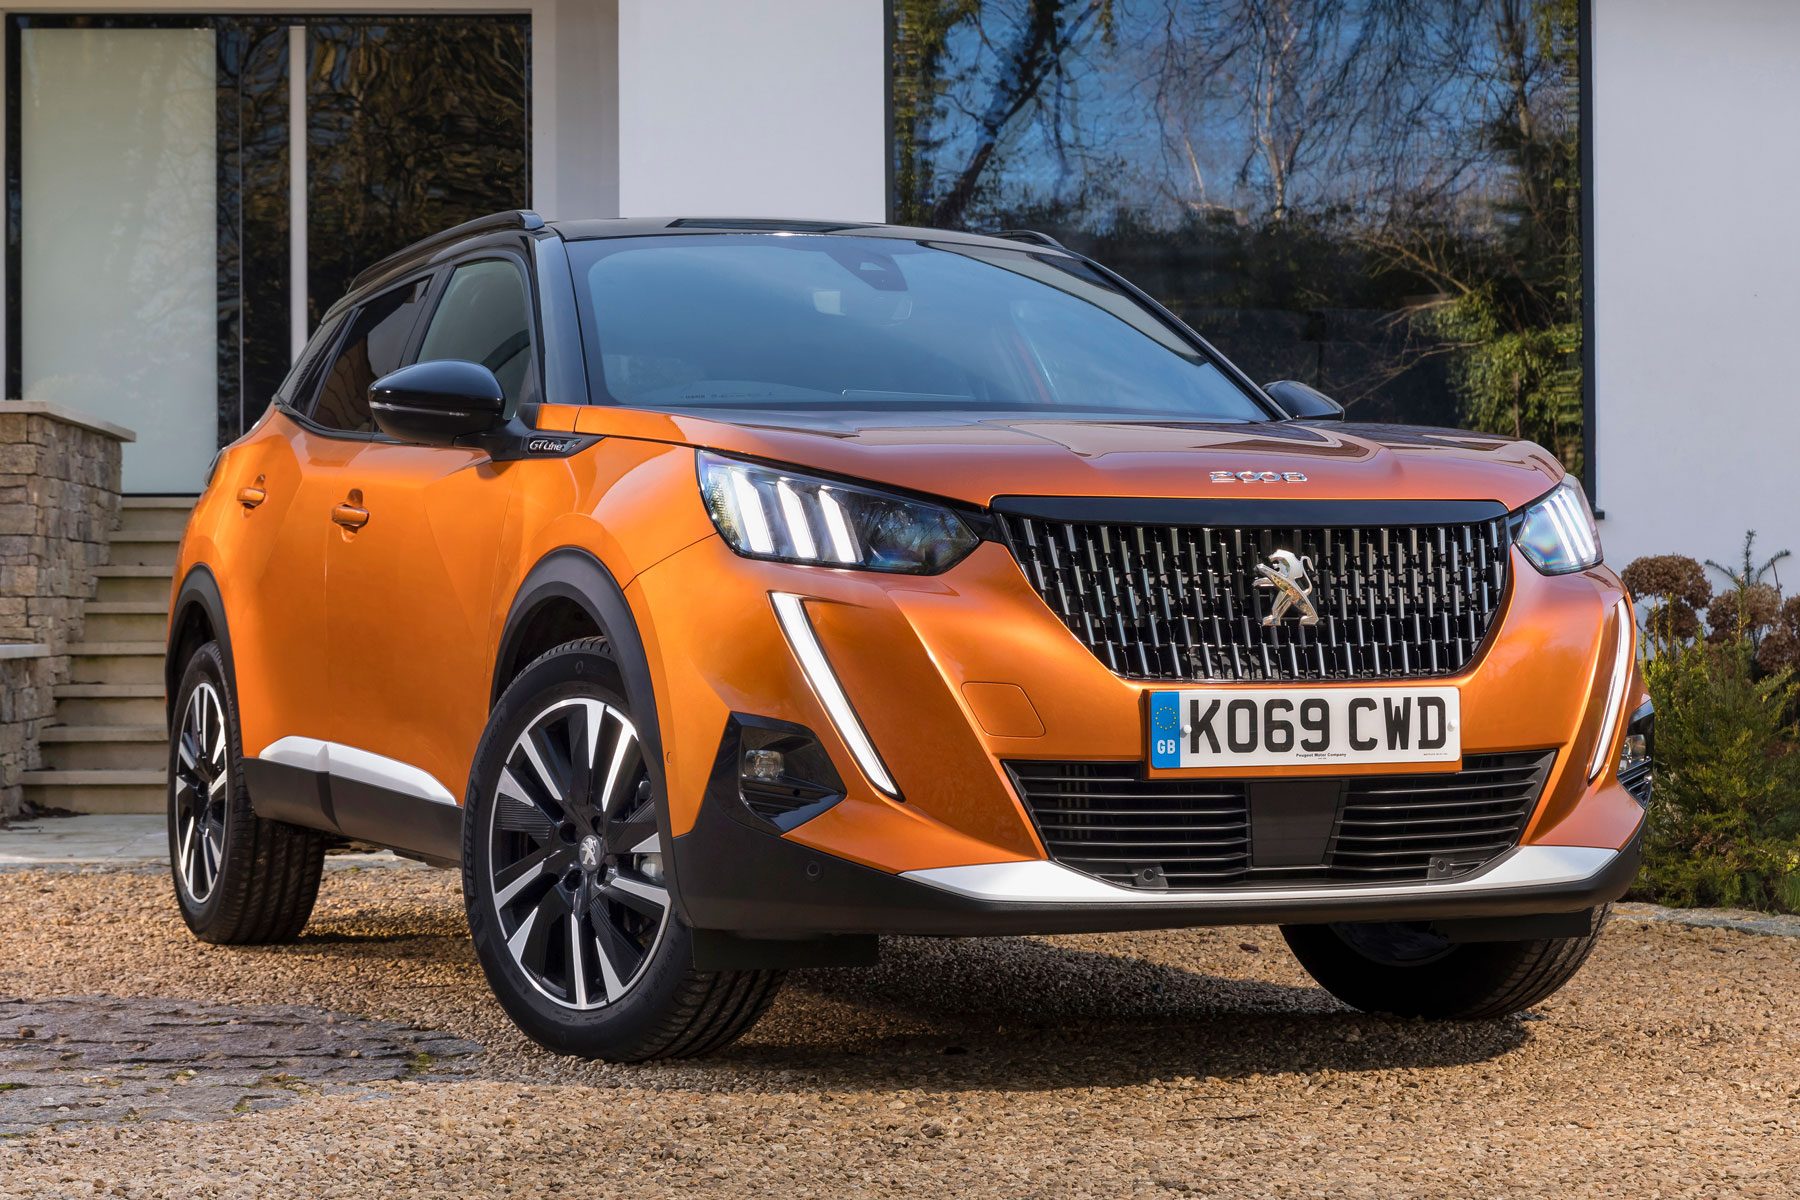 2021 Peugeot 2008 in-depth review - substance as well as style? 